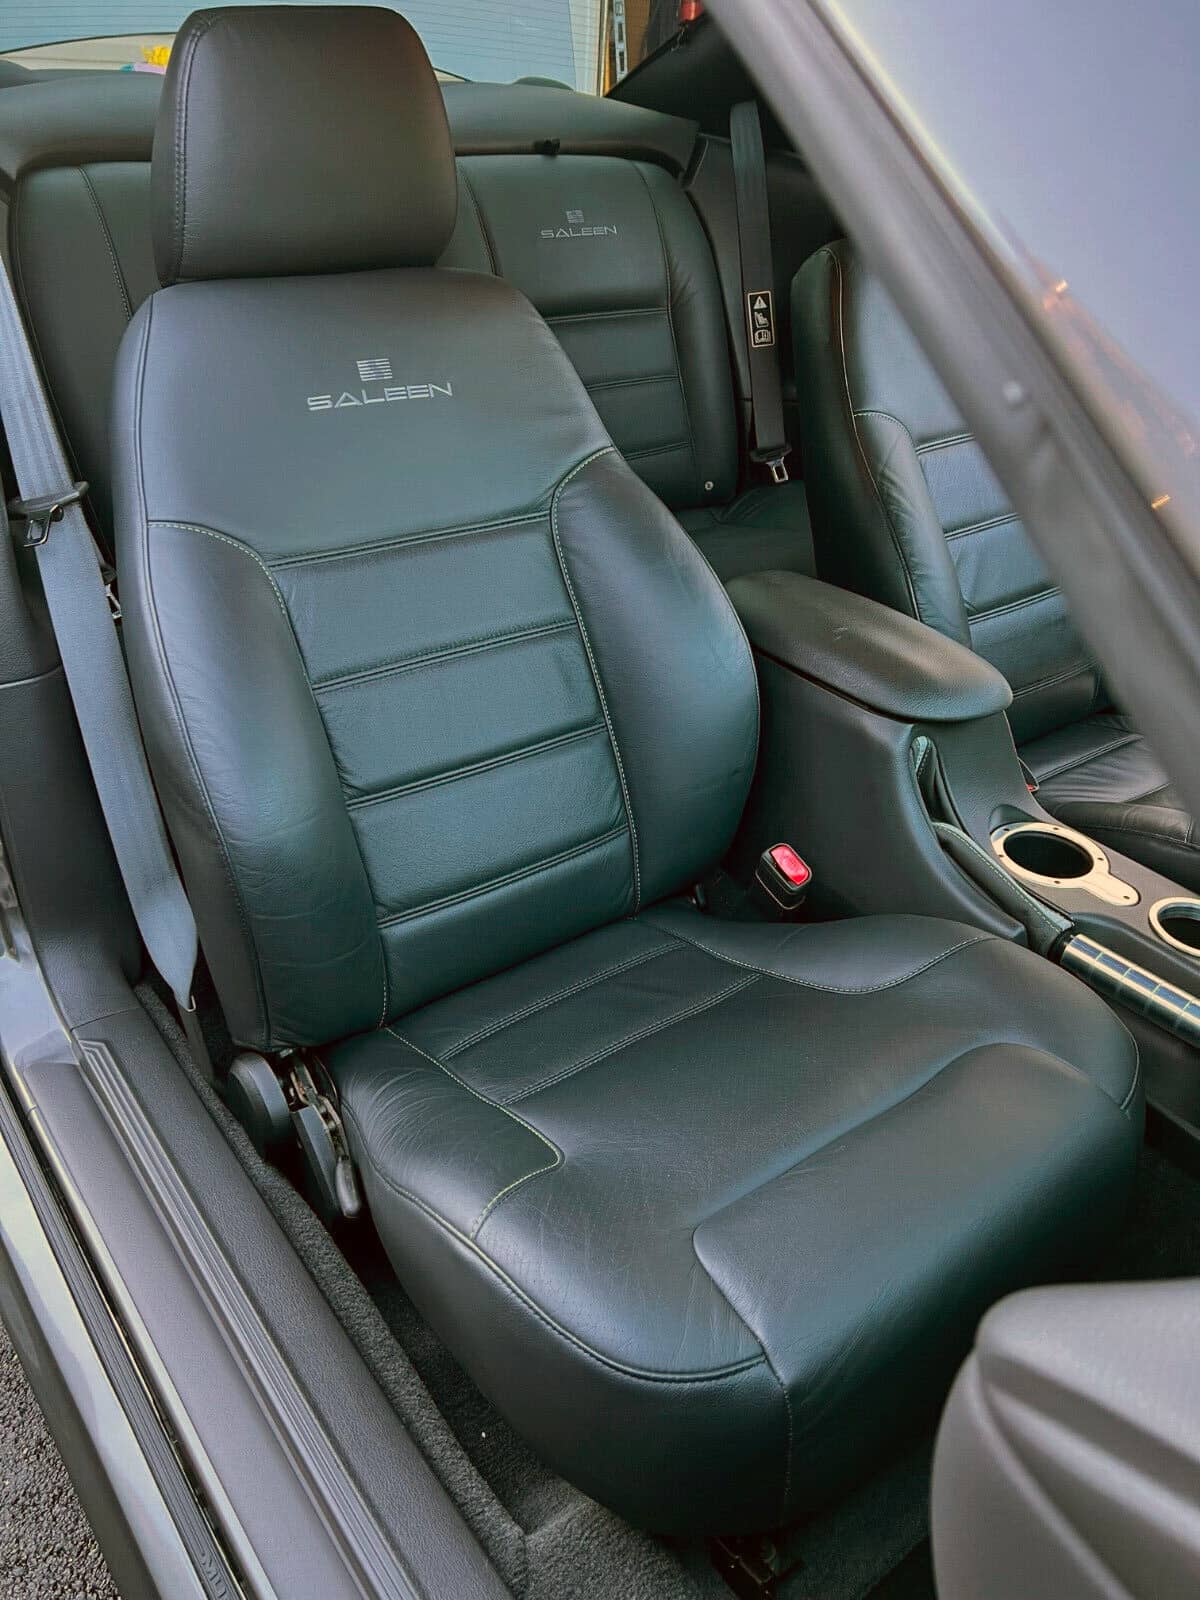 Saleen embroidered leather seats